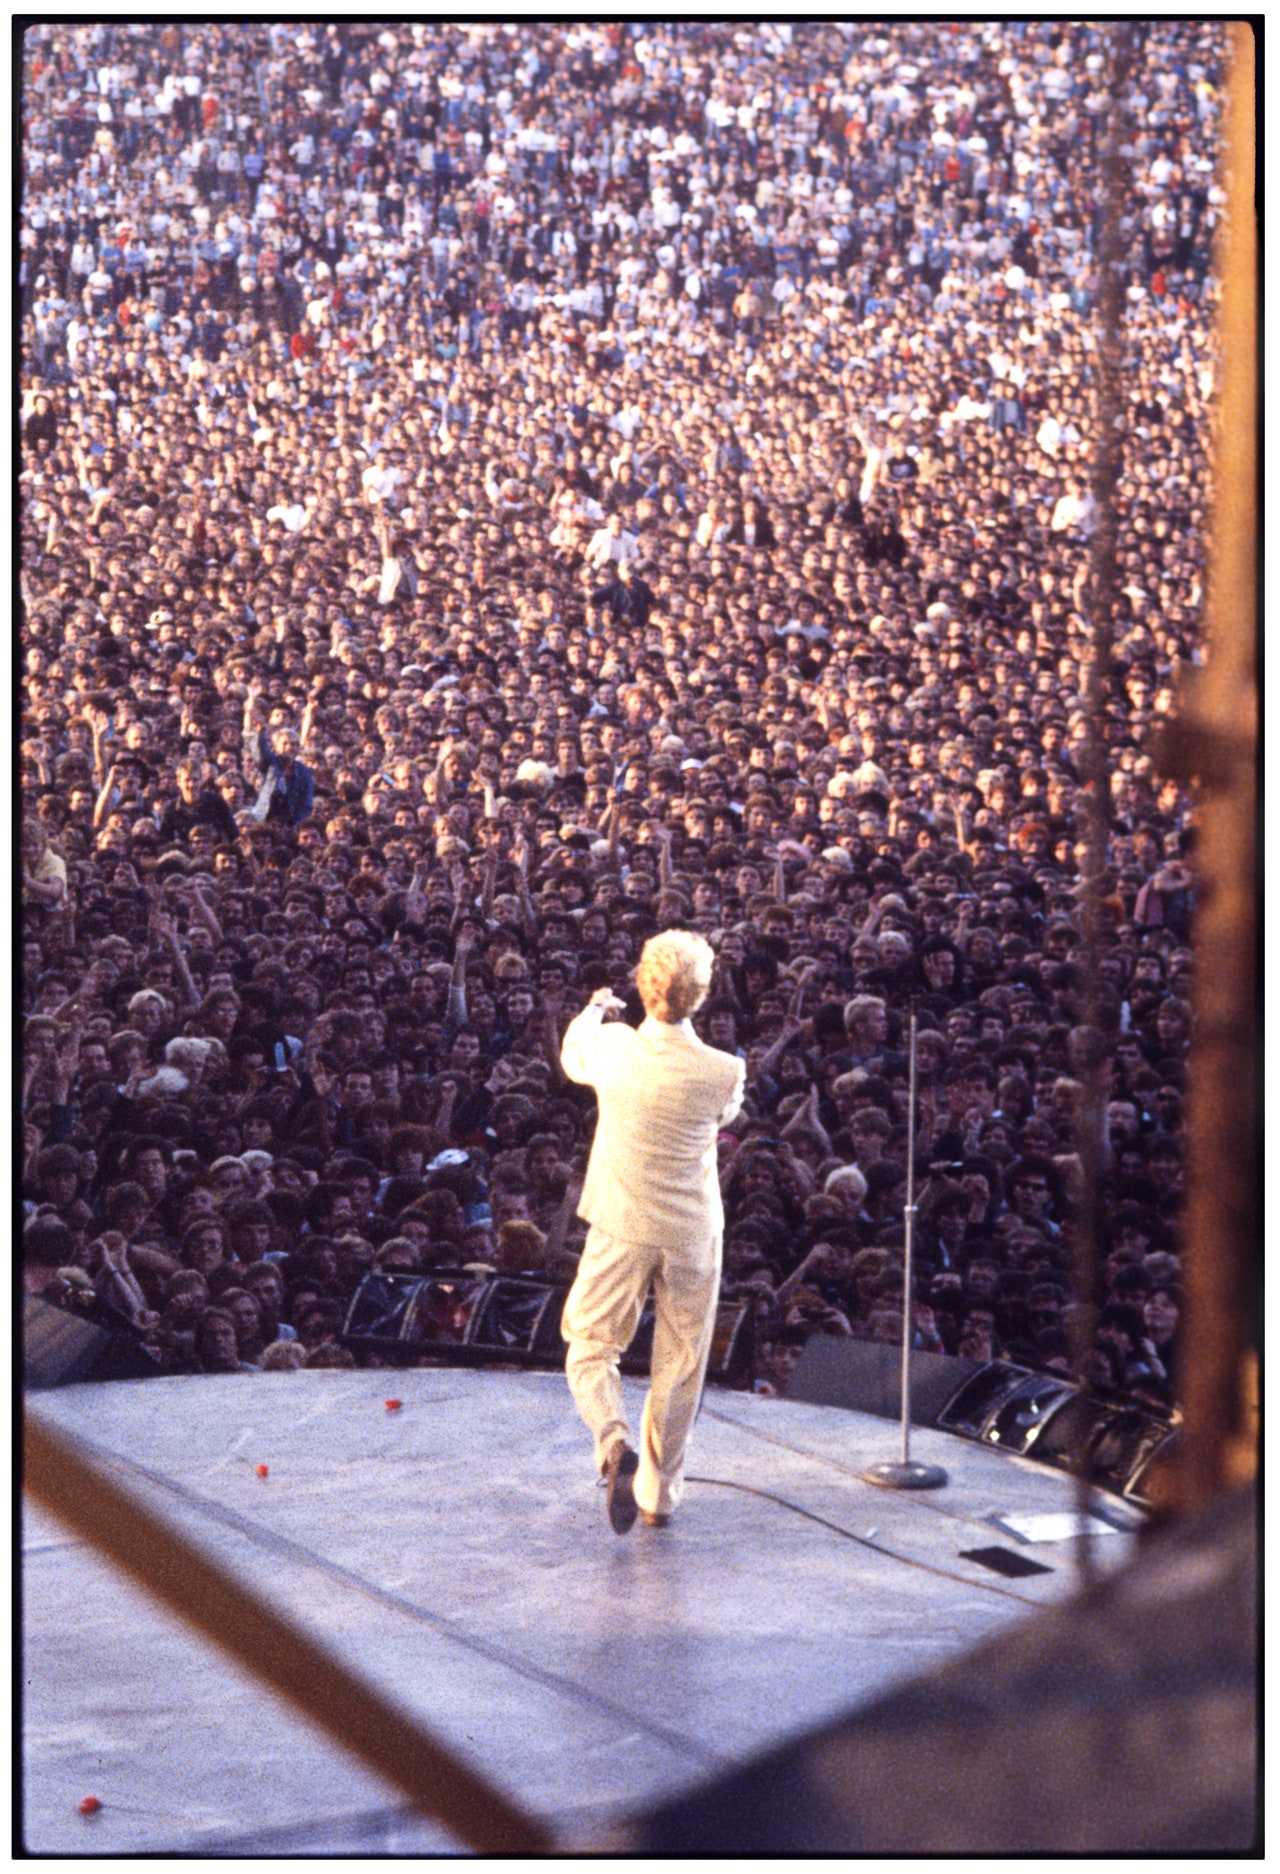 David Bowie on stage by Carinthia West